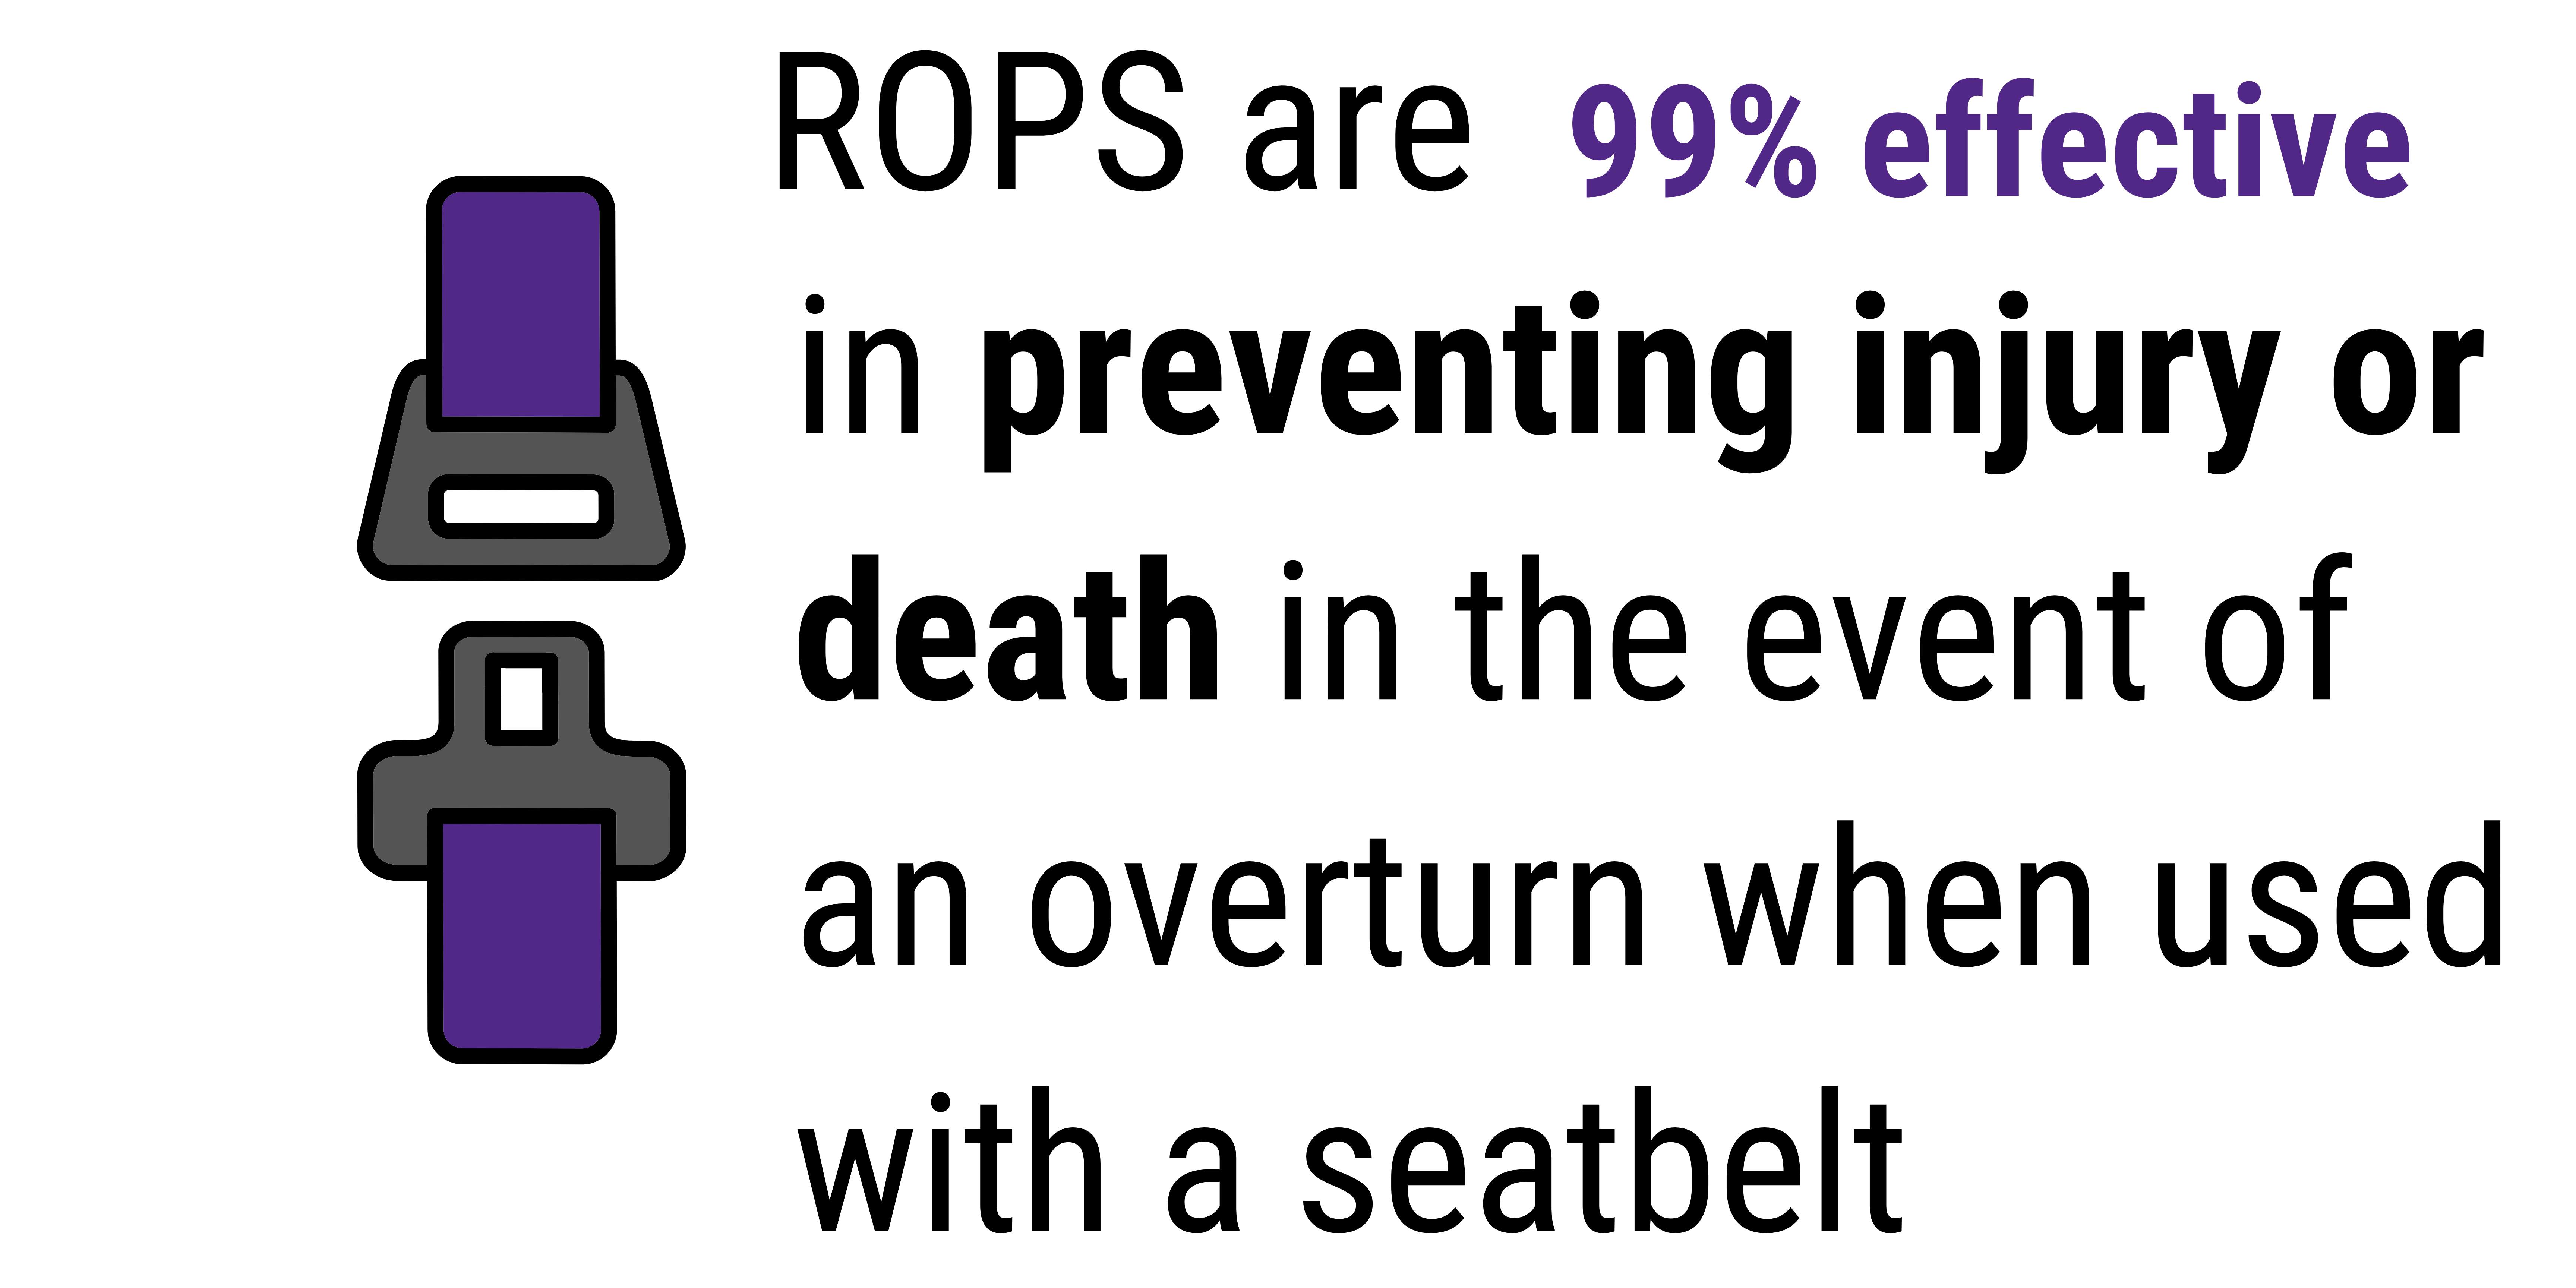 ROPS are 99% effective in preventing injury or death in the event of an overturn when used with a seatbelt. 